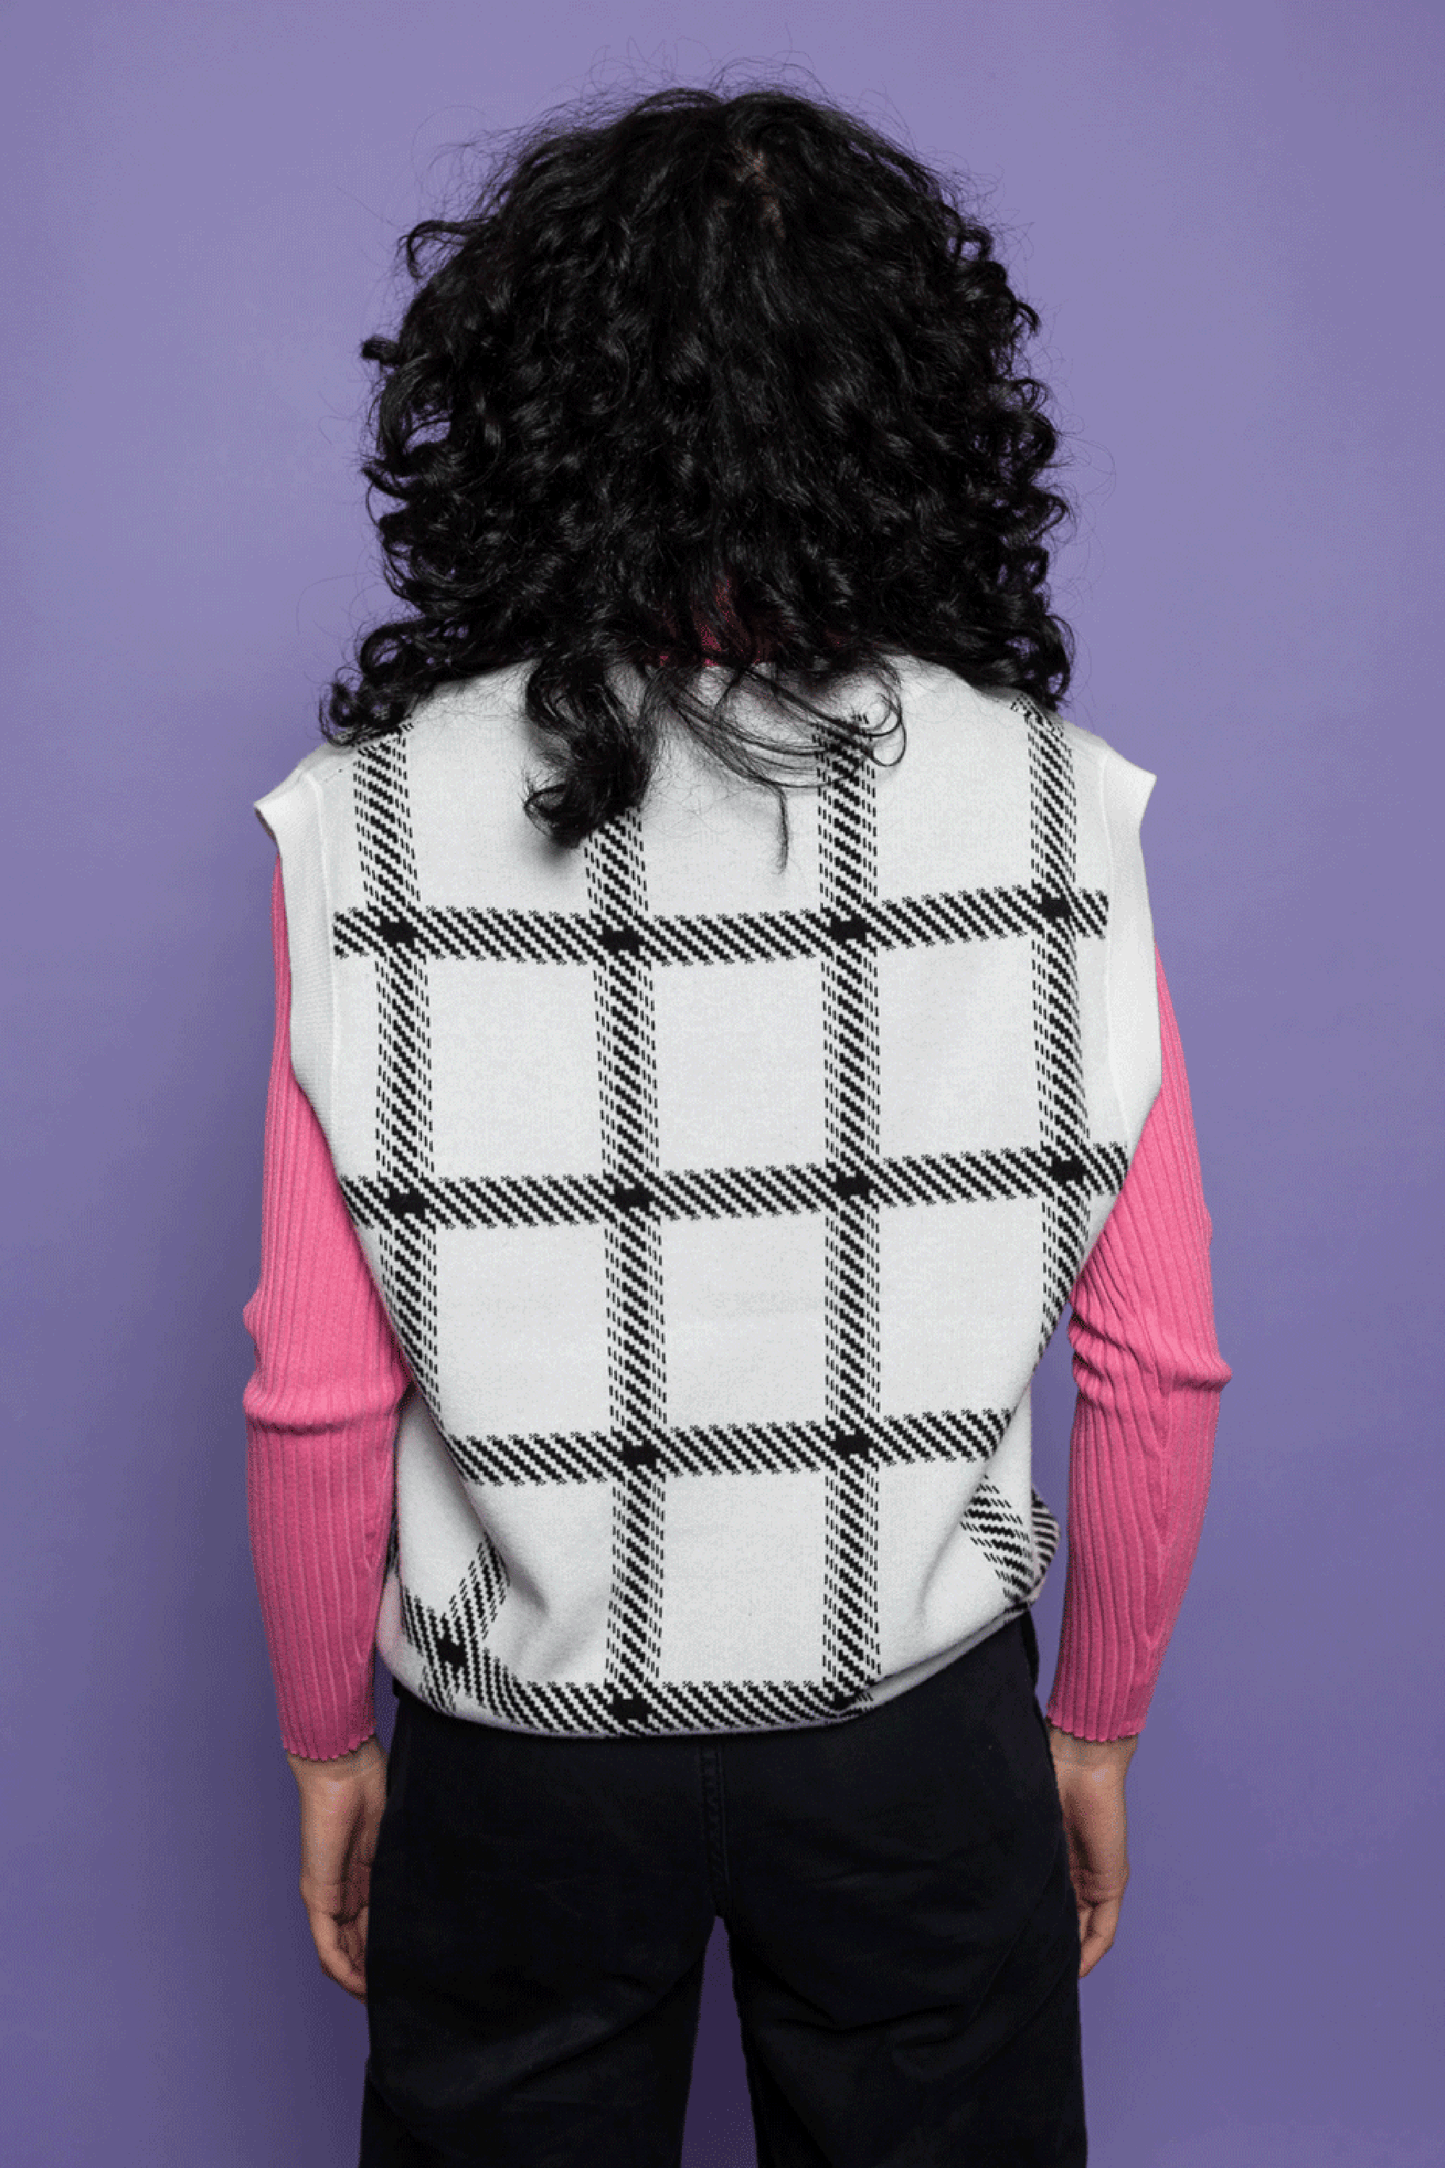 This is The Remix Sweater Vest IT'S TIME TO CHANGE - Knitted Vest with Big Crosshatches (B&W)